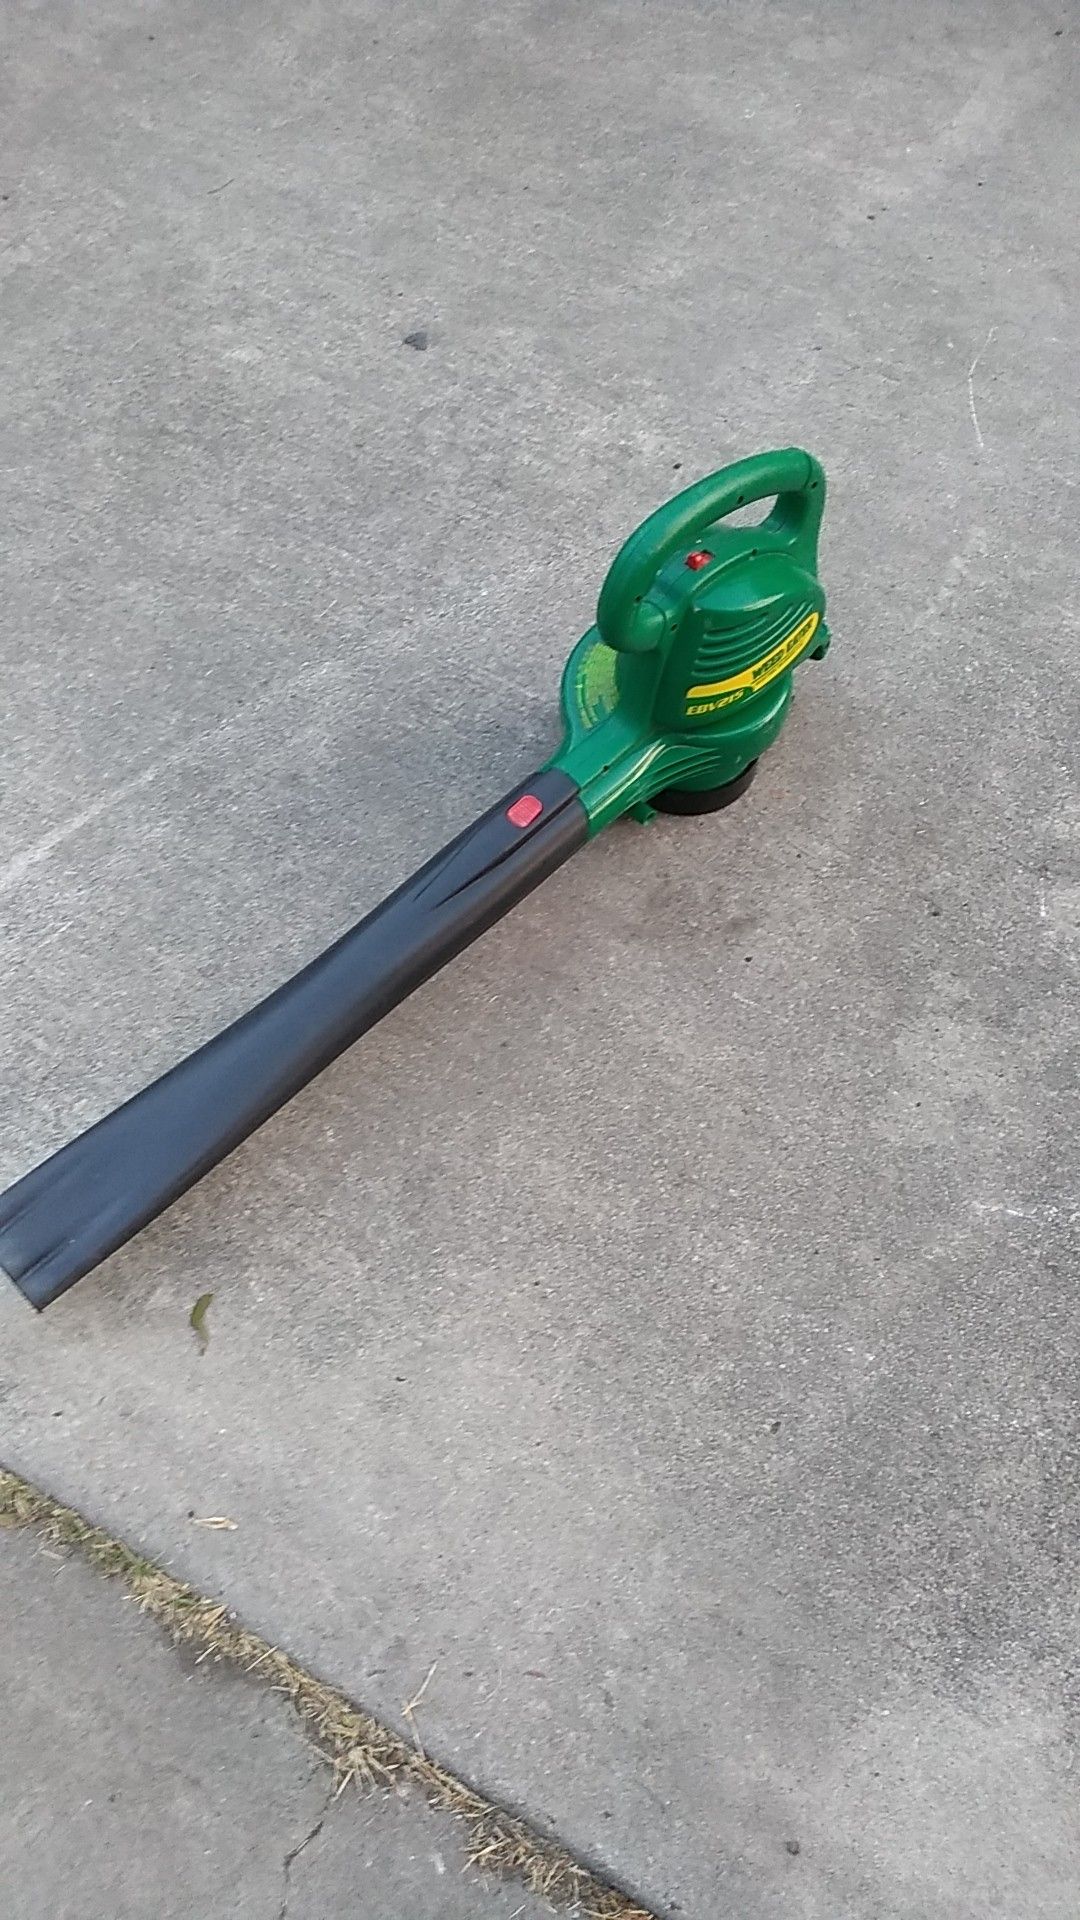 Weed eater ebv215 electric blower& vac